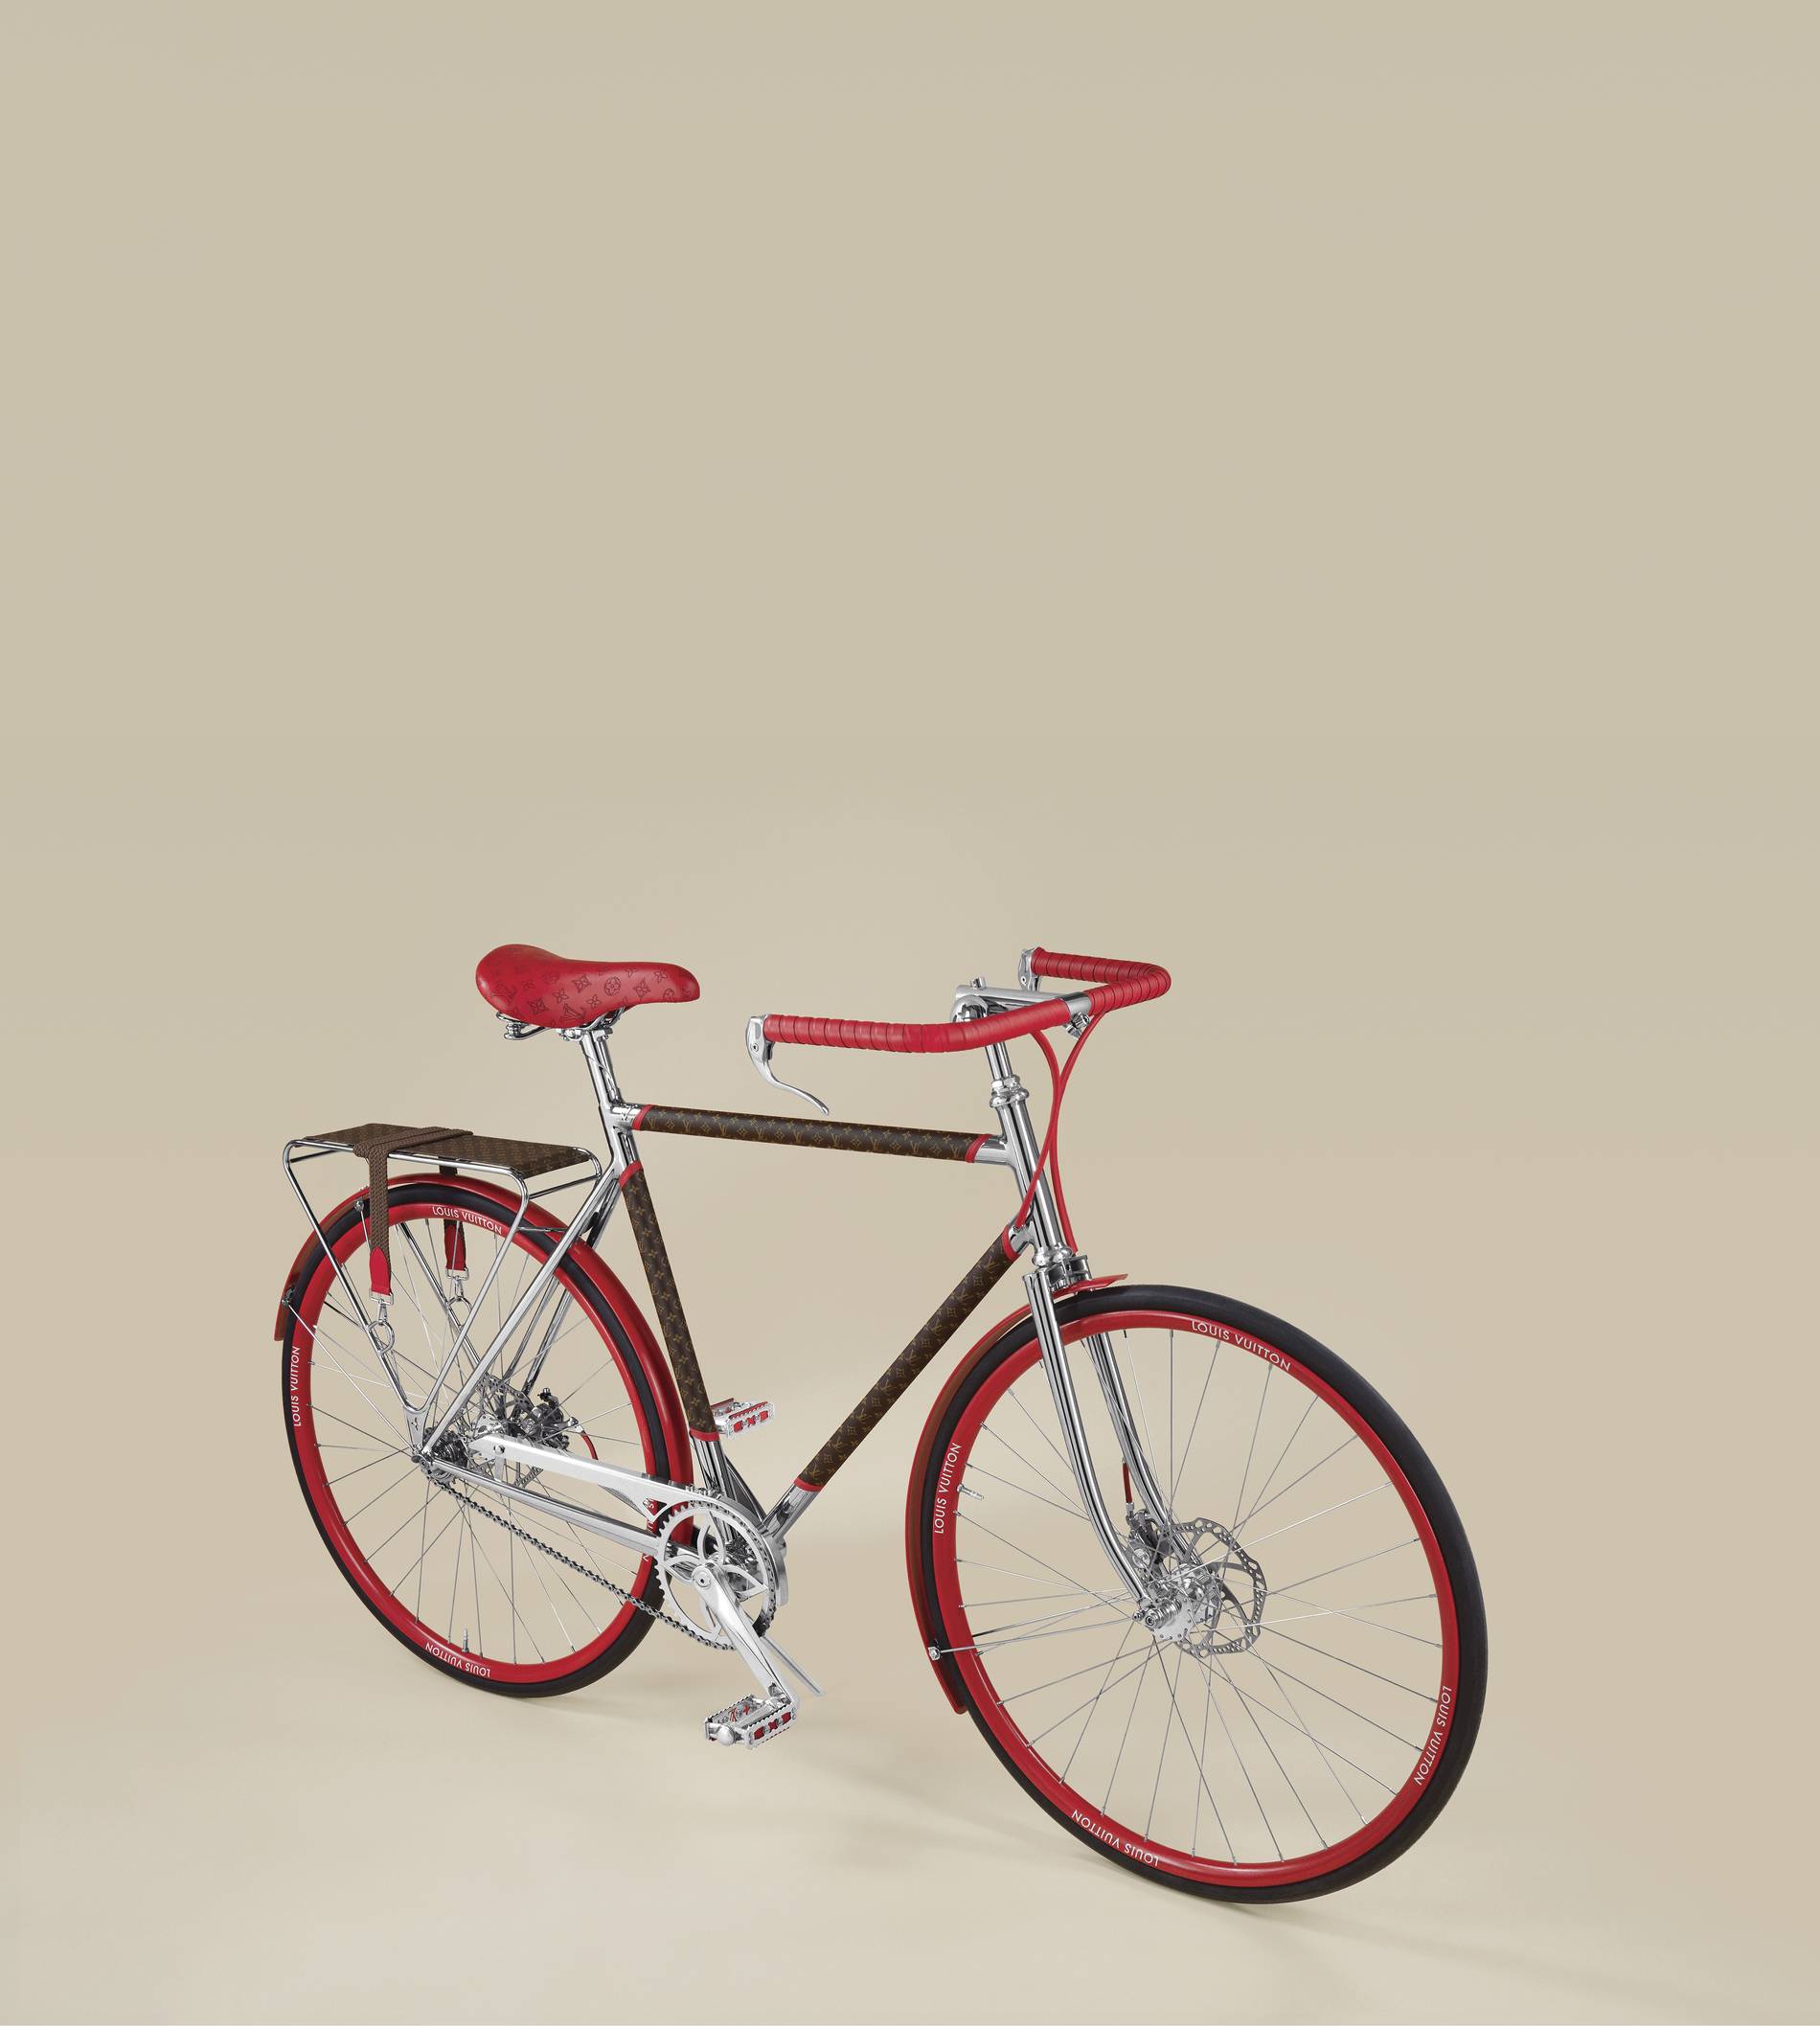 This Louis Vuitton Bike will Redefine the Meaning of Sports Chic